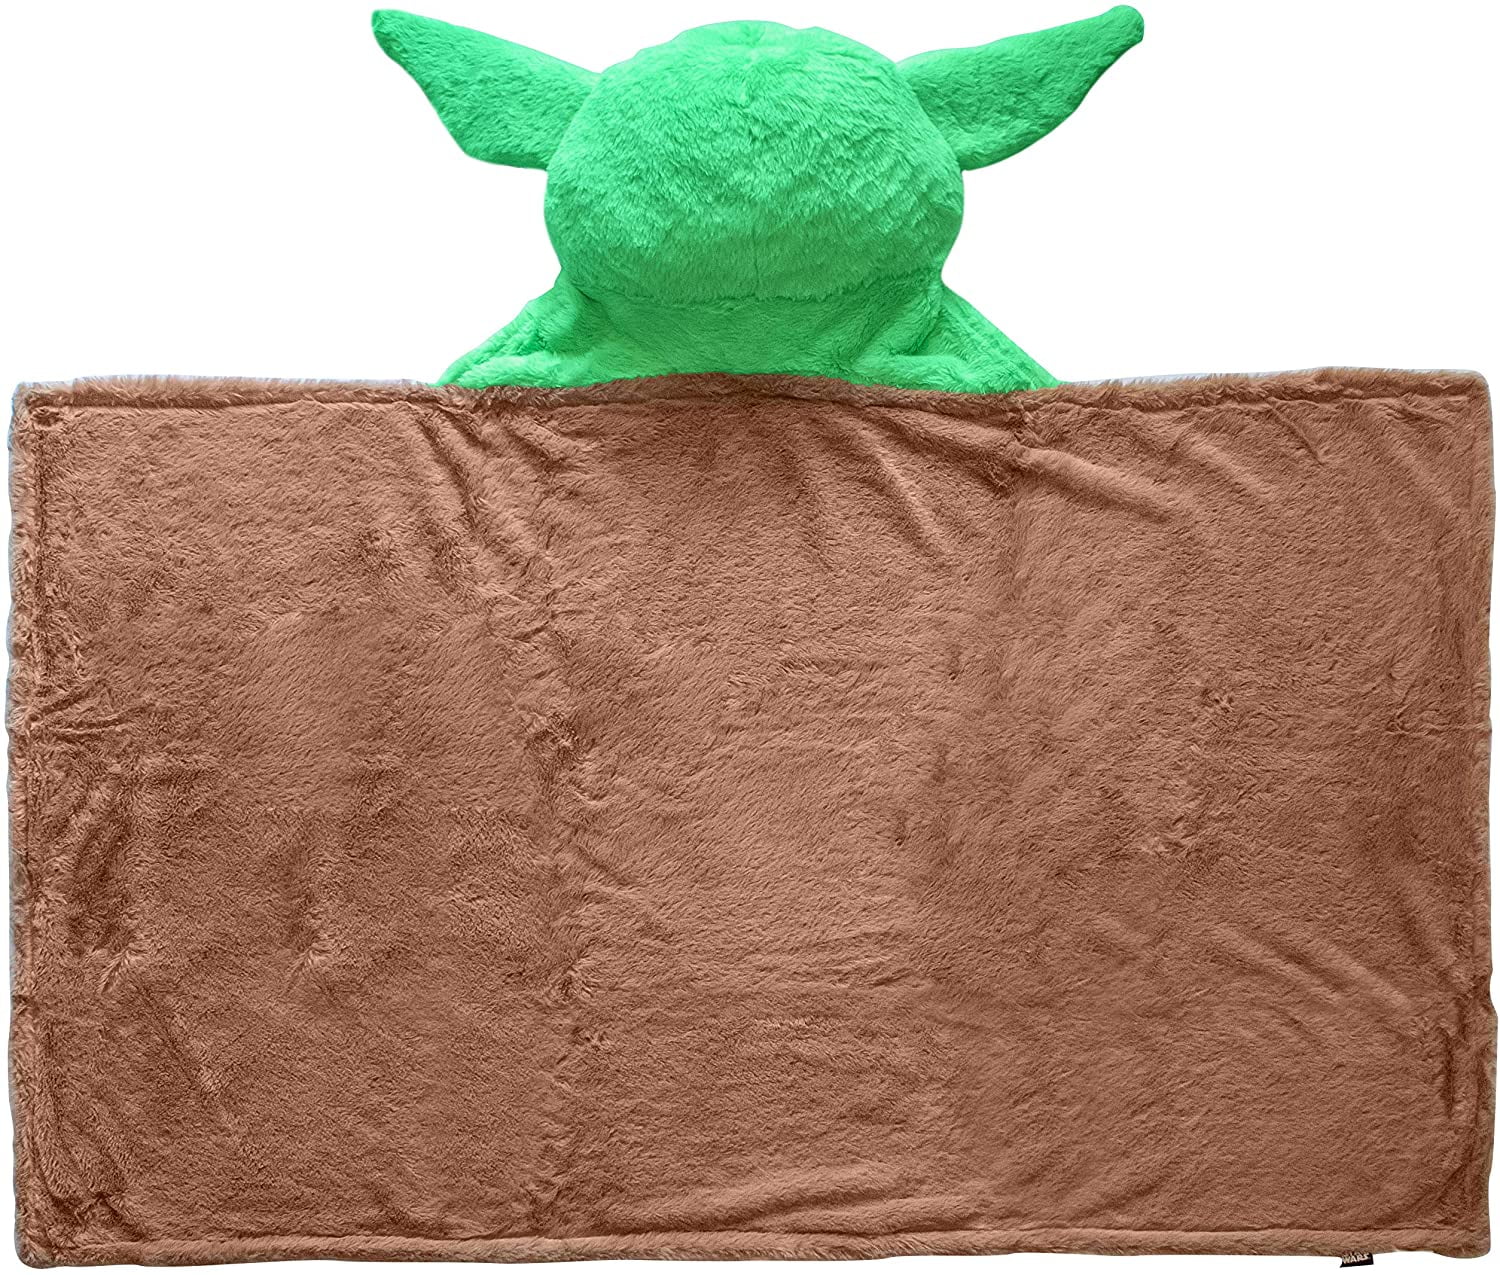 Fade Resistant Polyester 50 x 30 2-in-1 Wearable Kids Plush Blanket Featuring Chewbacca Jay Franco Star Wars Chewy Hooded Blanket Offical Star Wars Product 